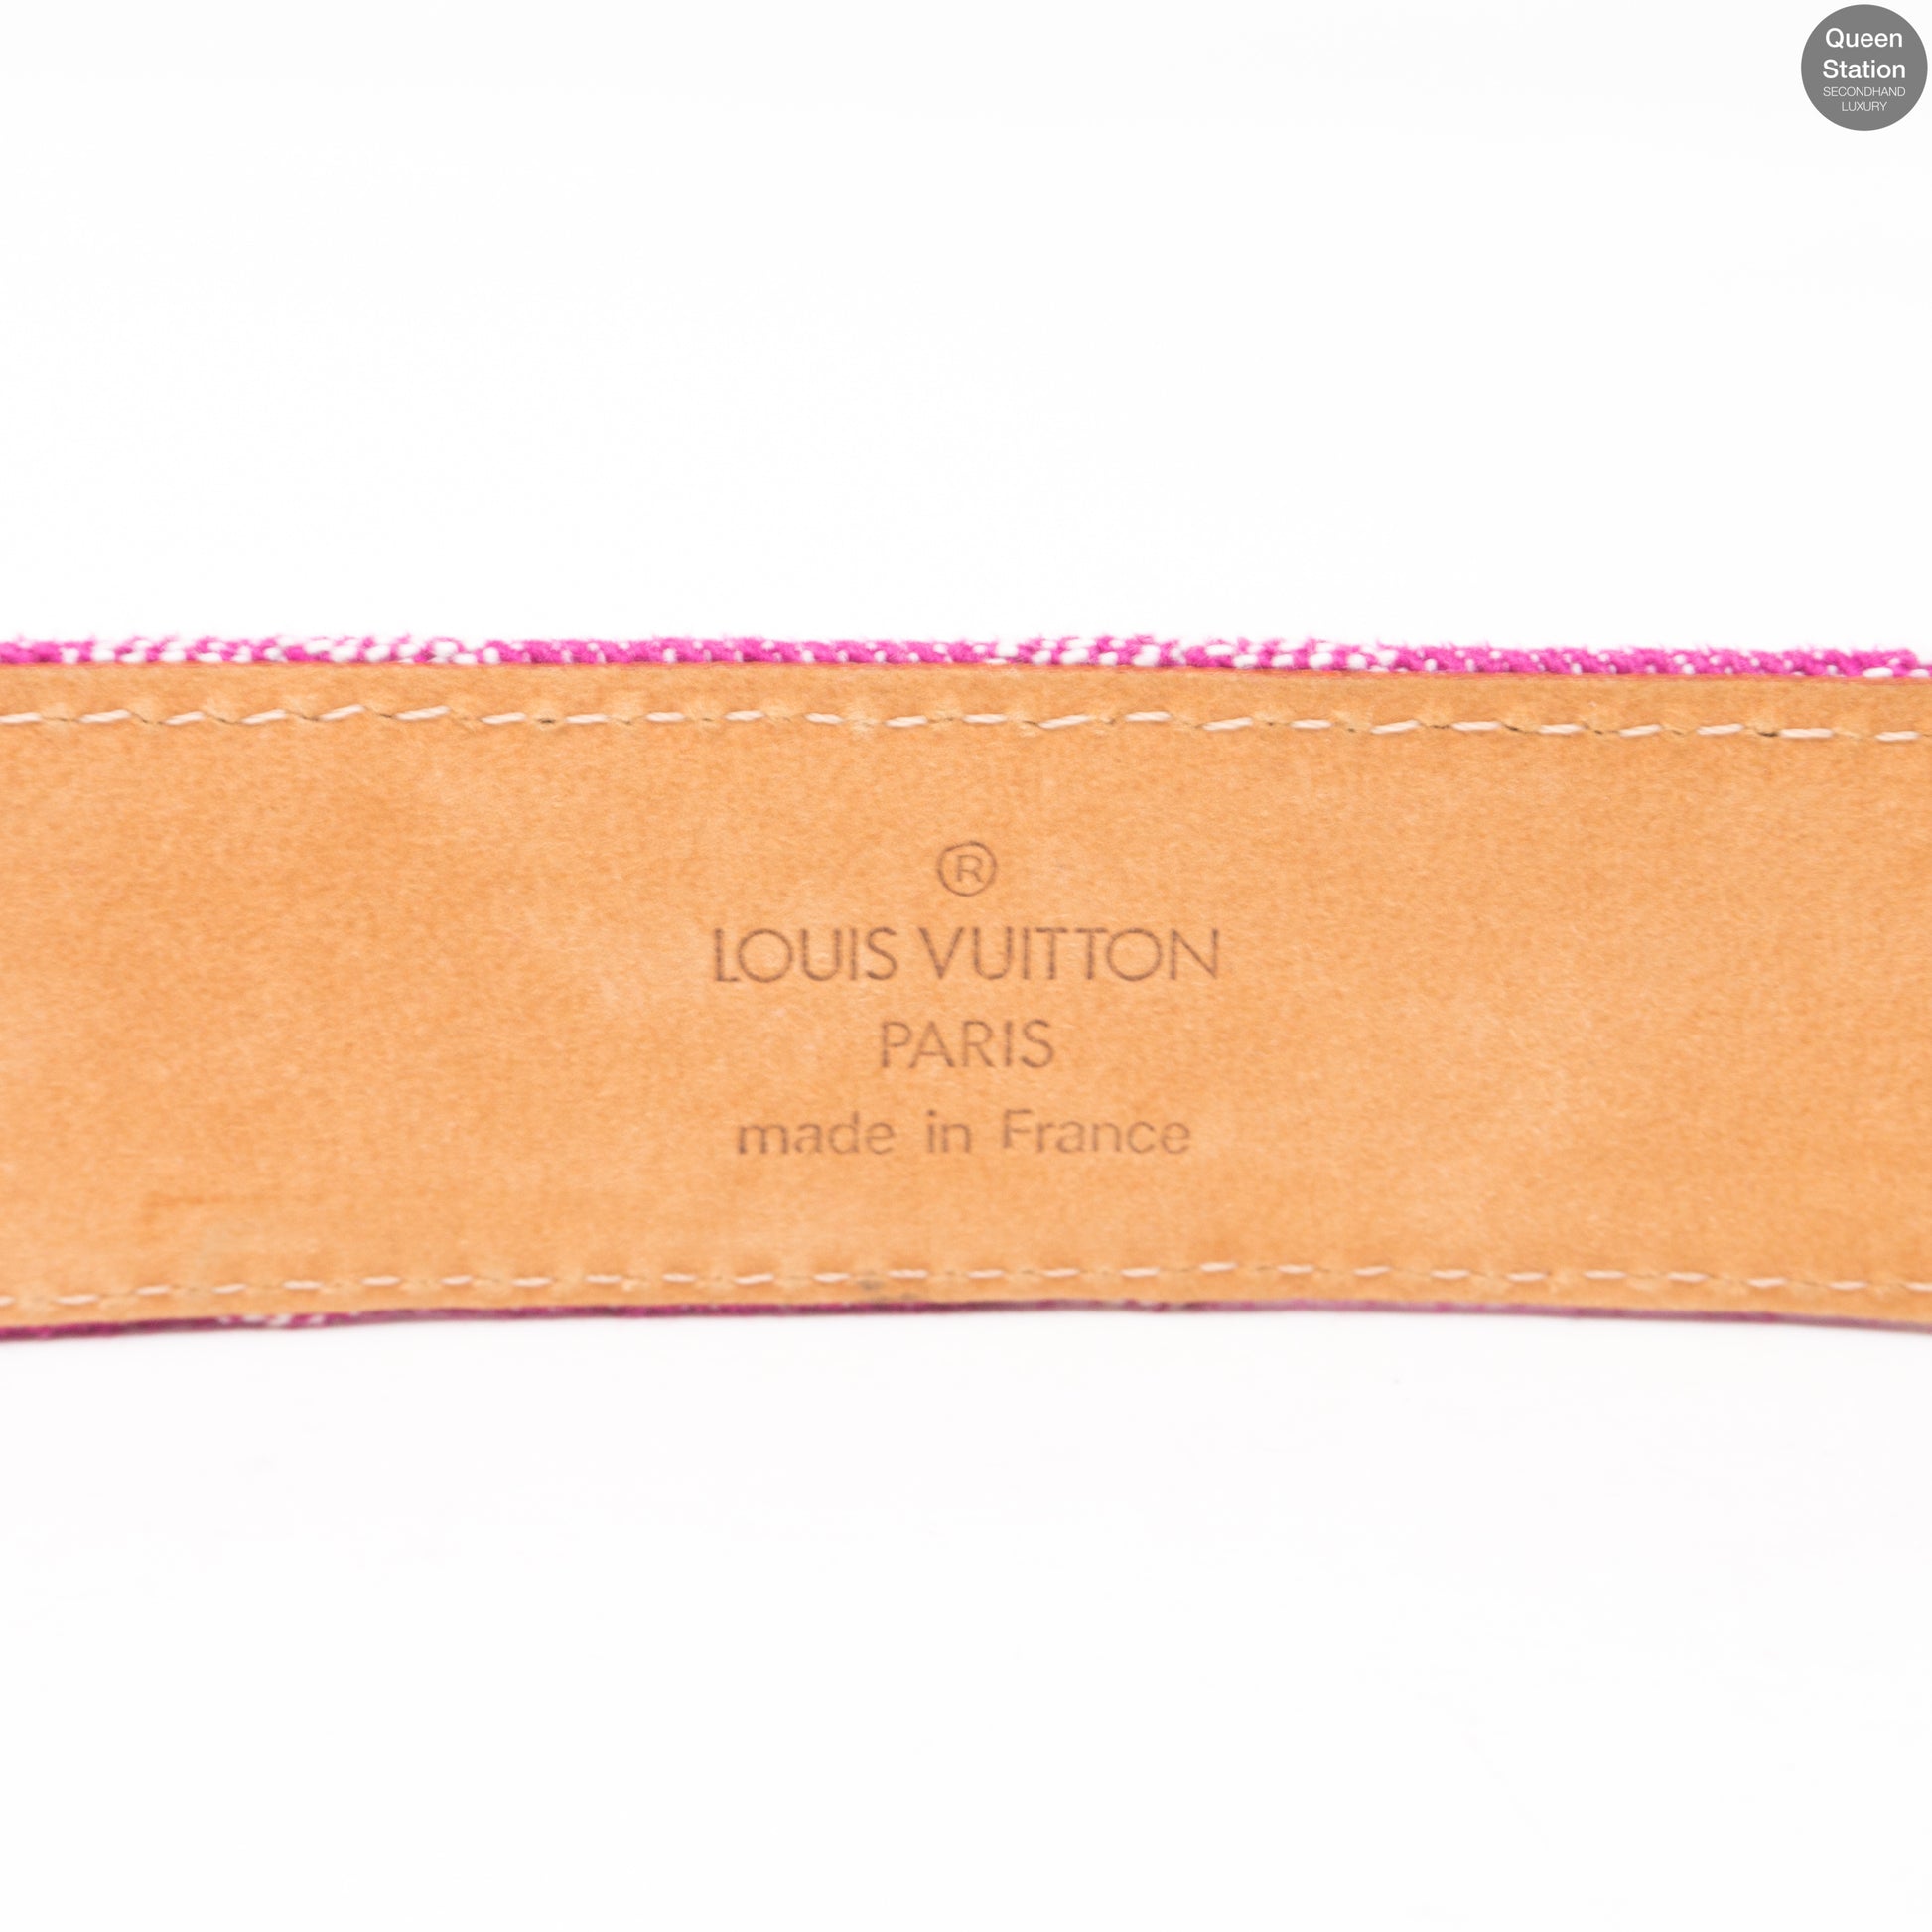 louis vuitton paris made in france real